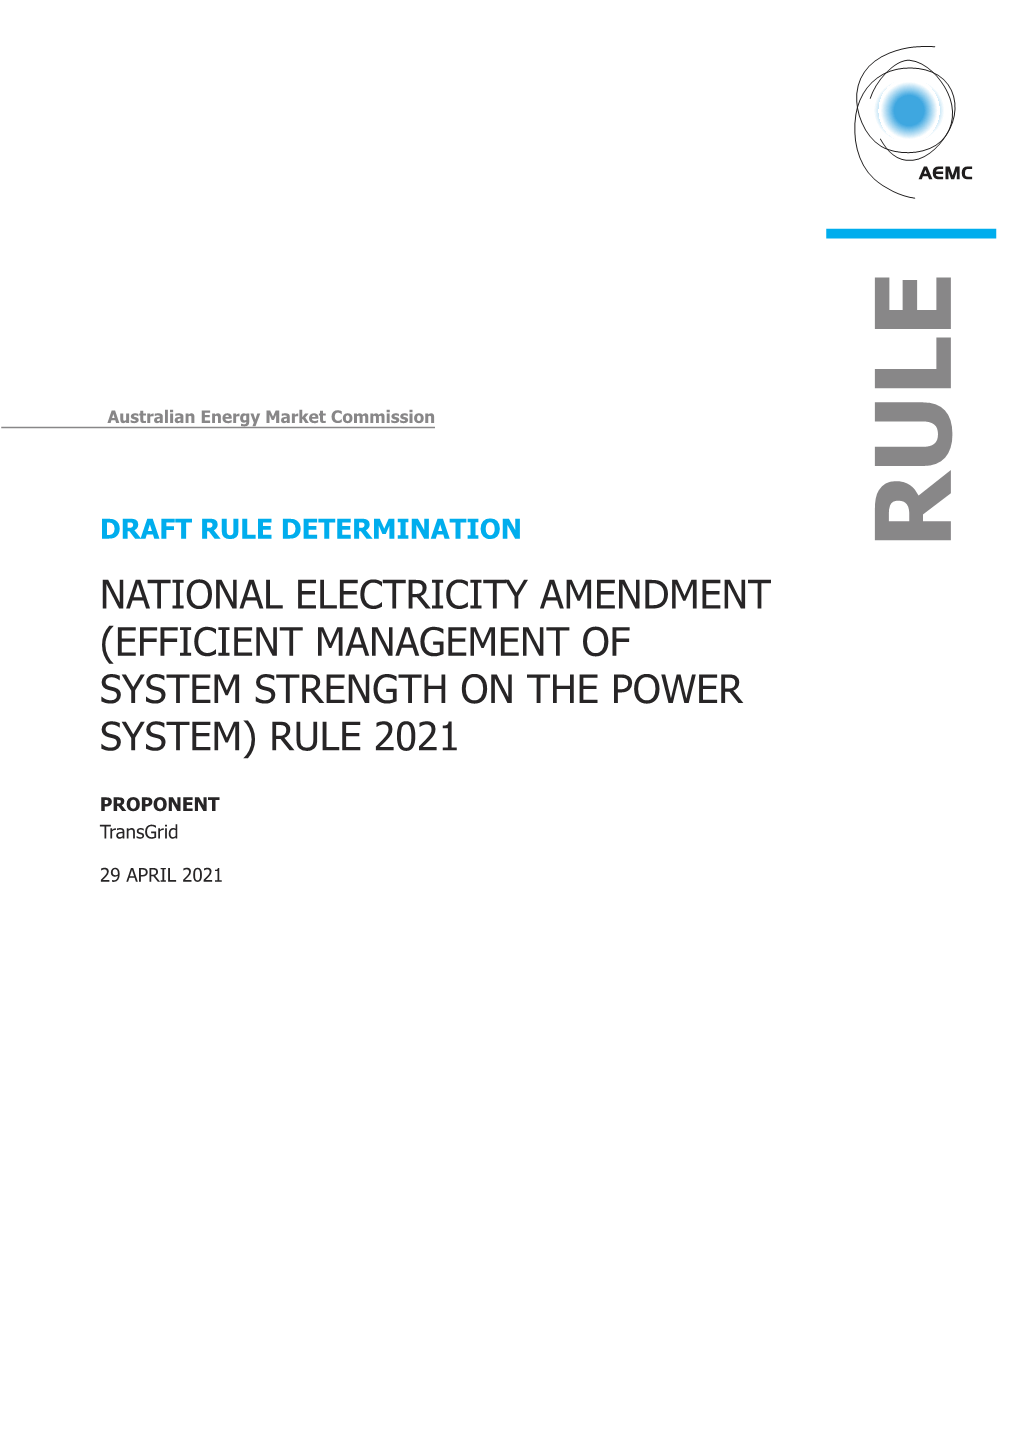 Draft Rule Determination Rule National Electricity Amendment (Efficient Management of System Strength on the Power System) Rule 2021